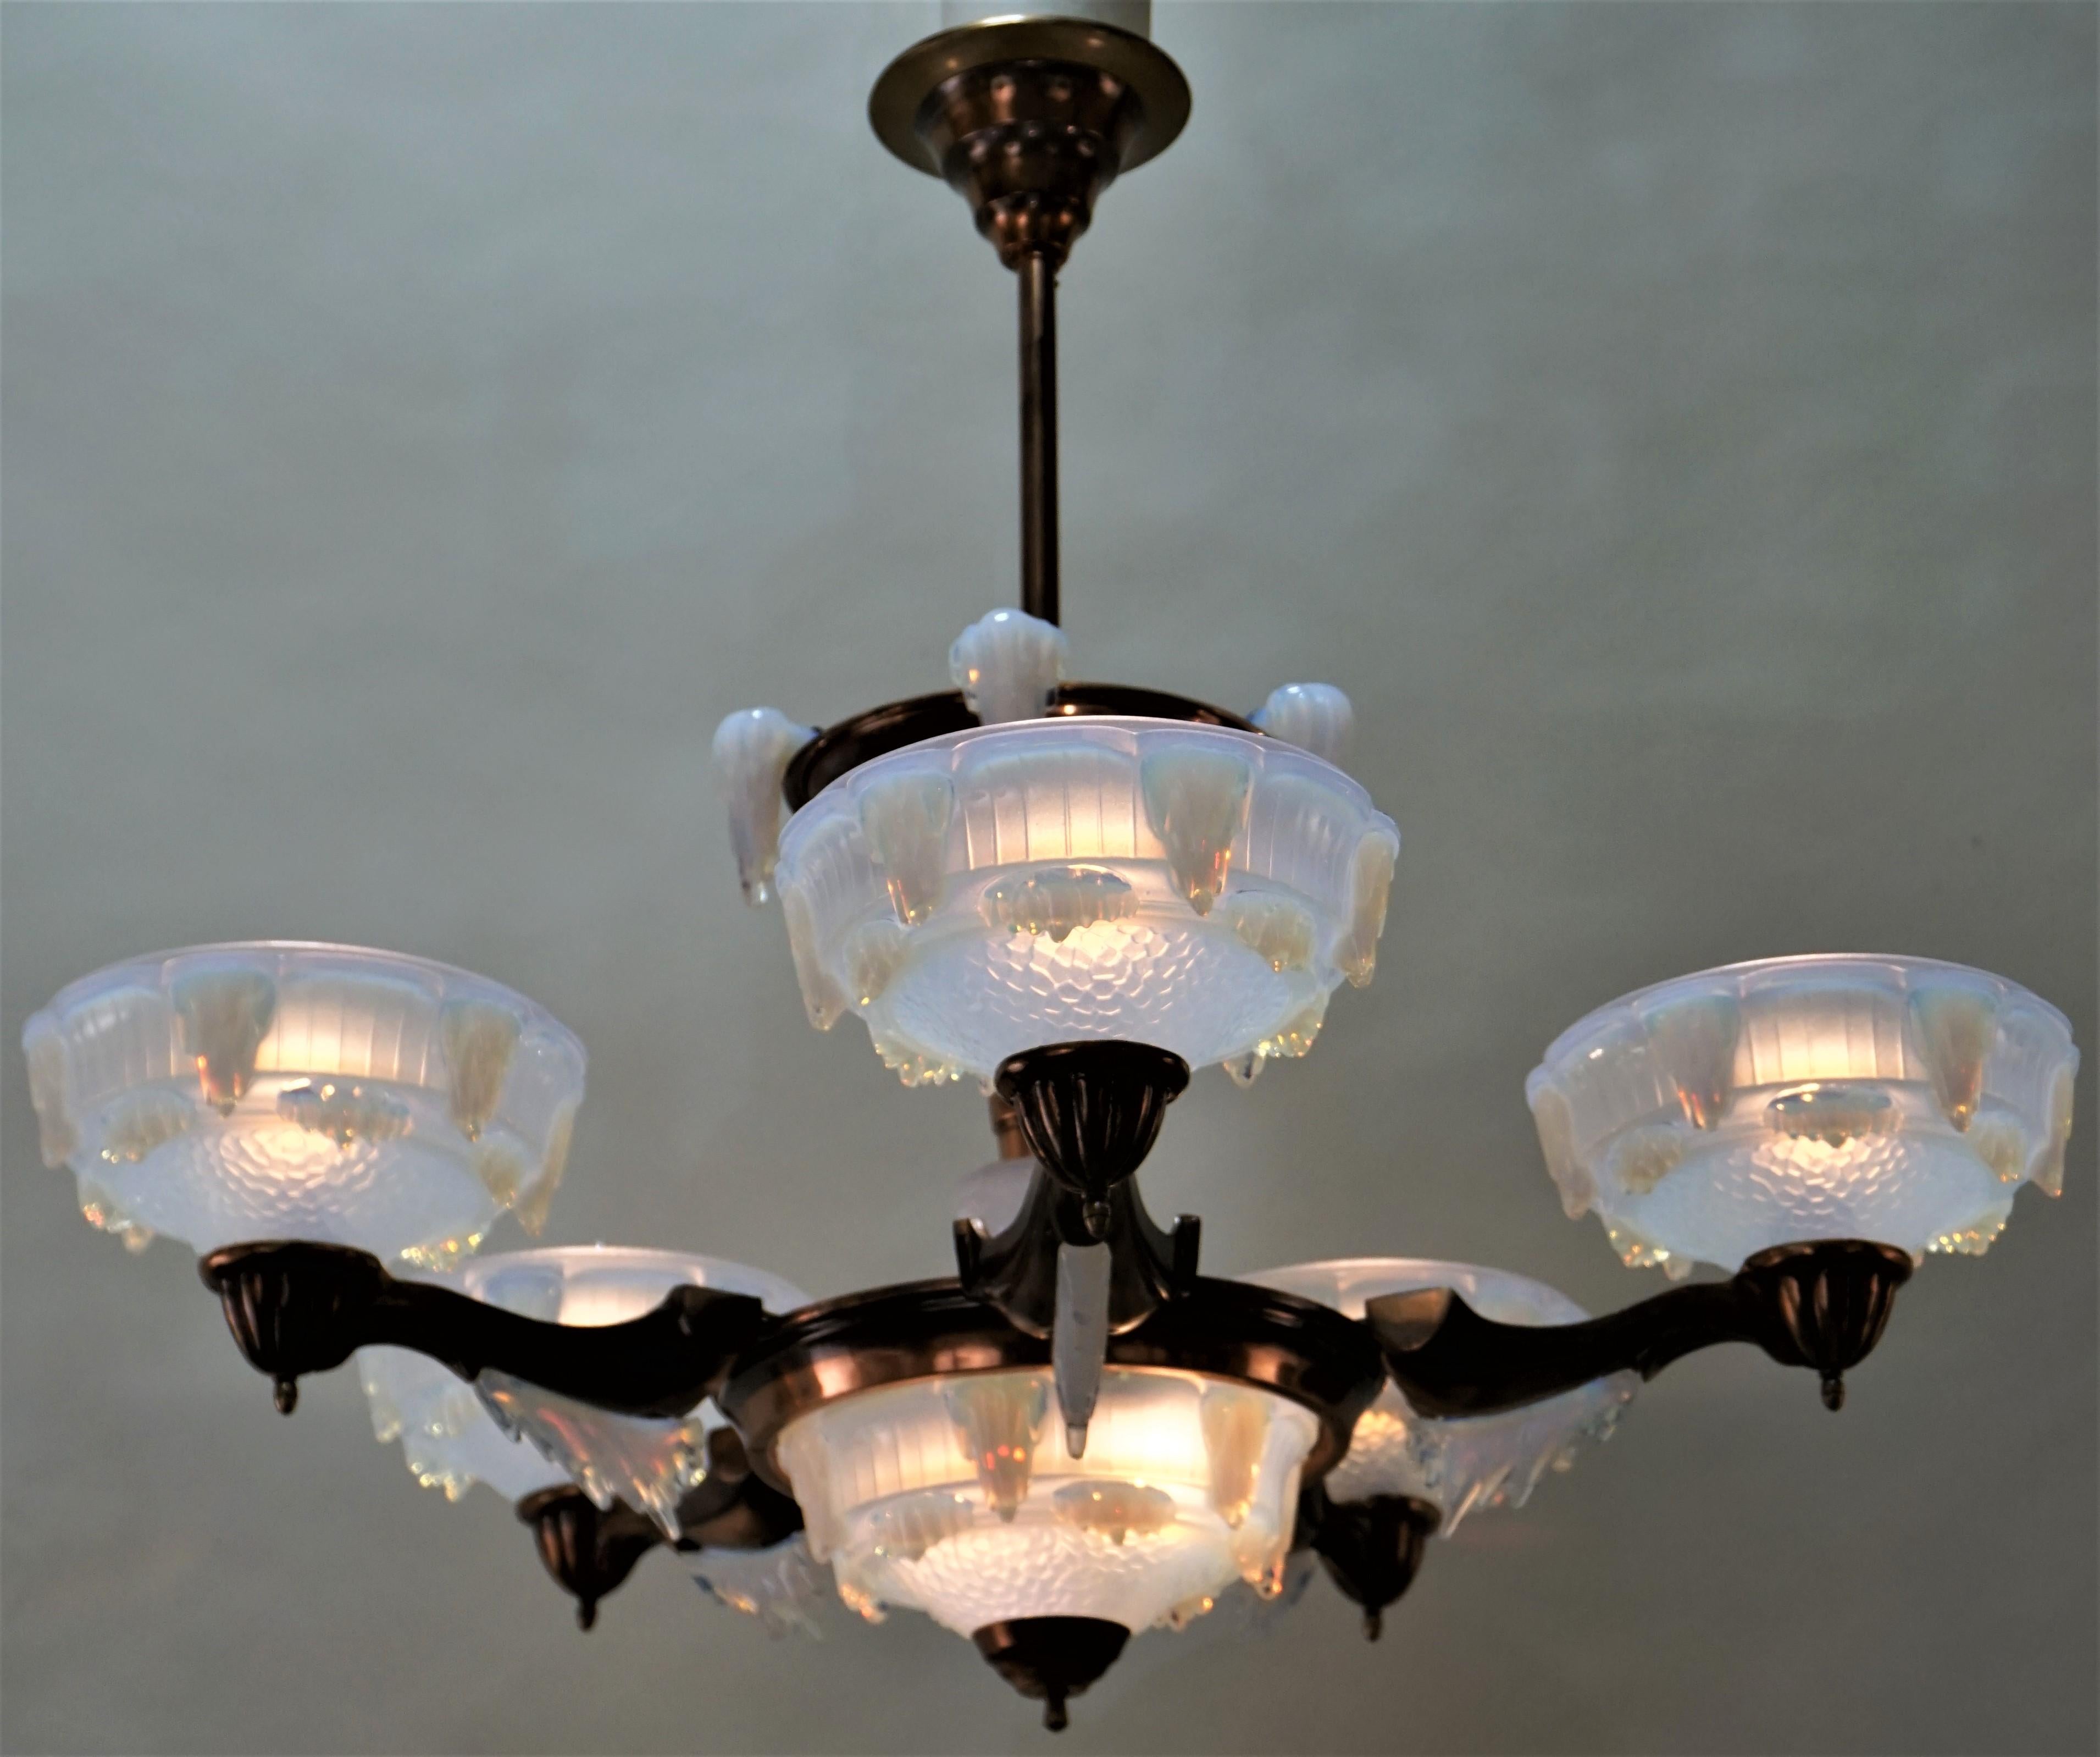 French 1930s copper finish chandelier with opalescent glass shades.